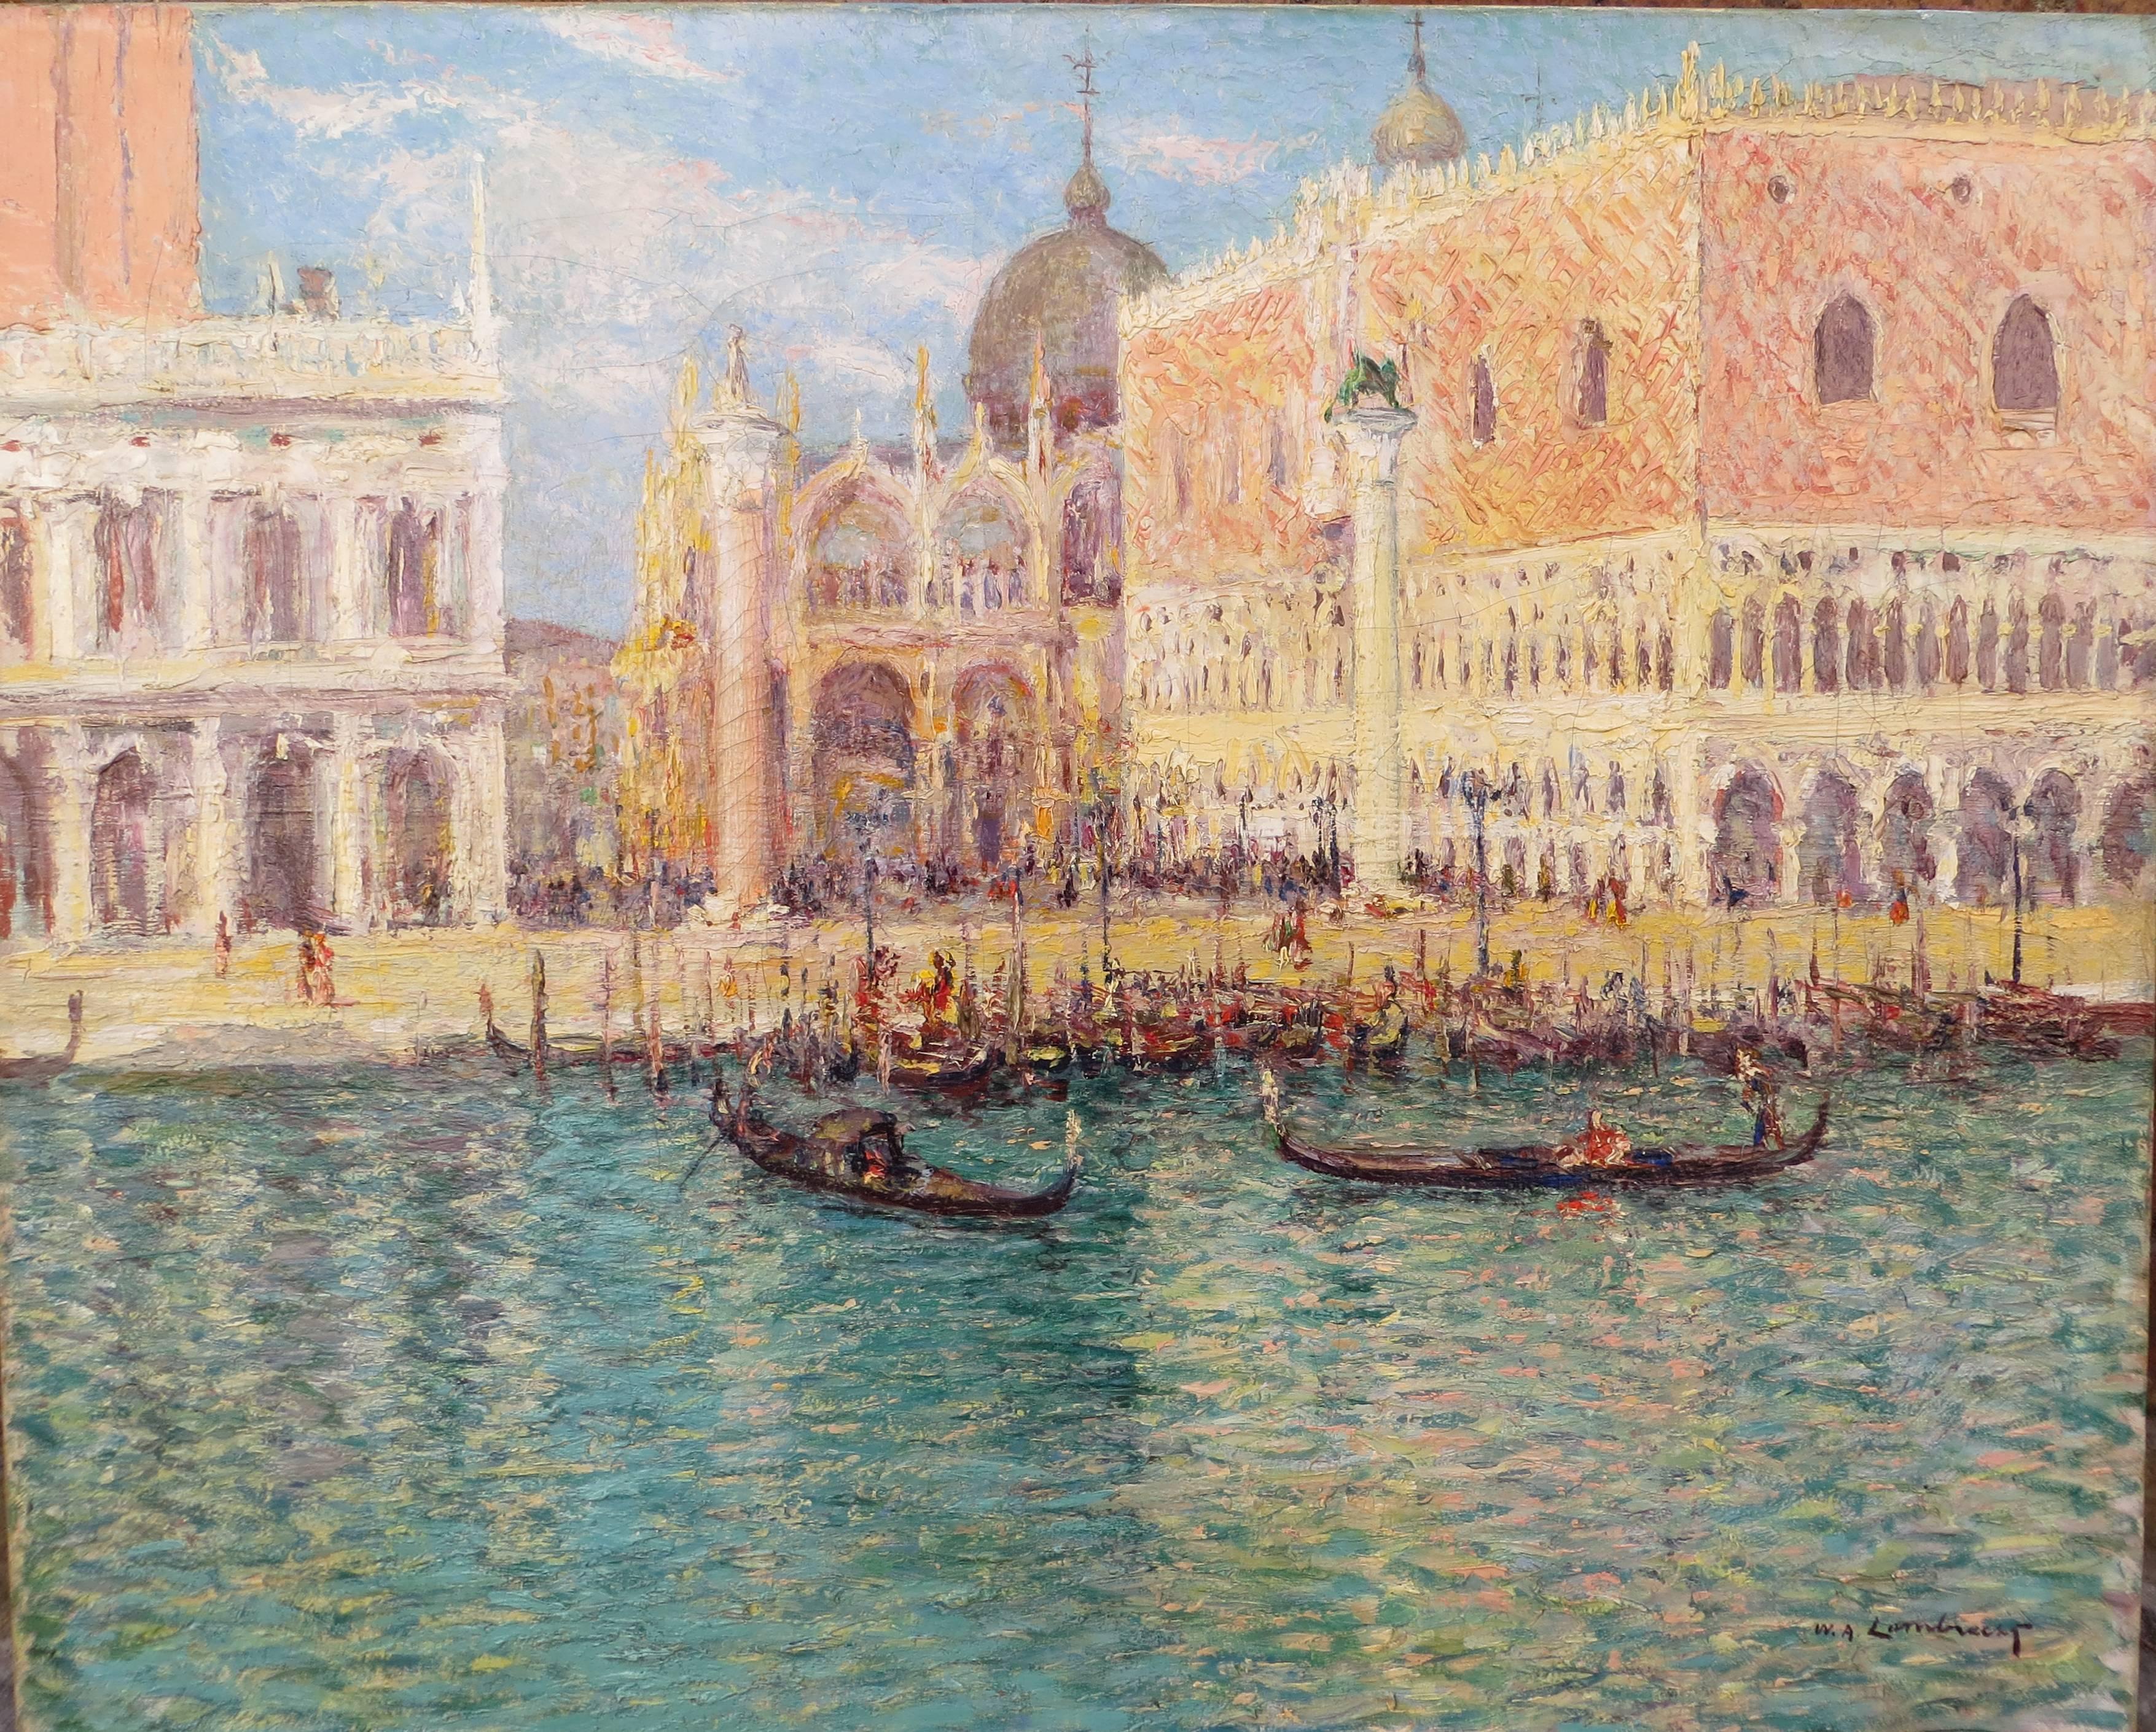 WILLIAM ADOLPHE LAMBRECHT Landscape Painting -  San Marco place  in Venice Oil on Canvas by W.A Lambrecht